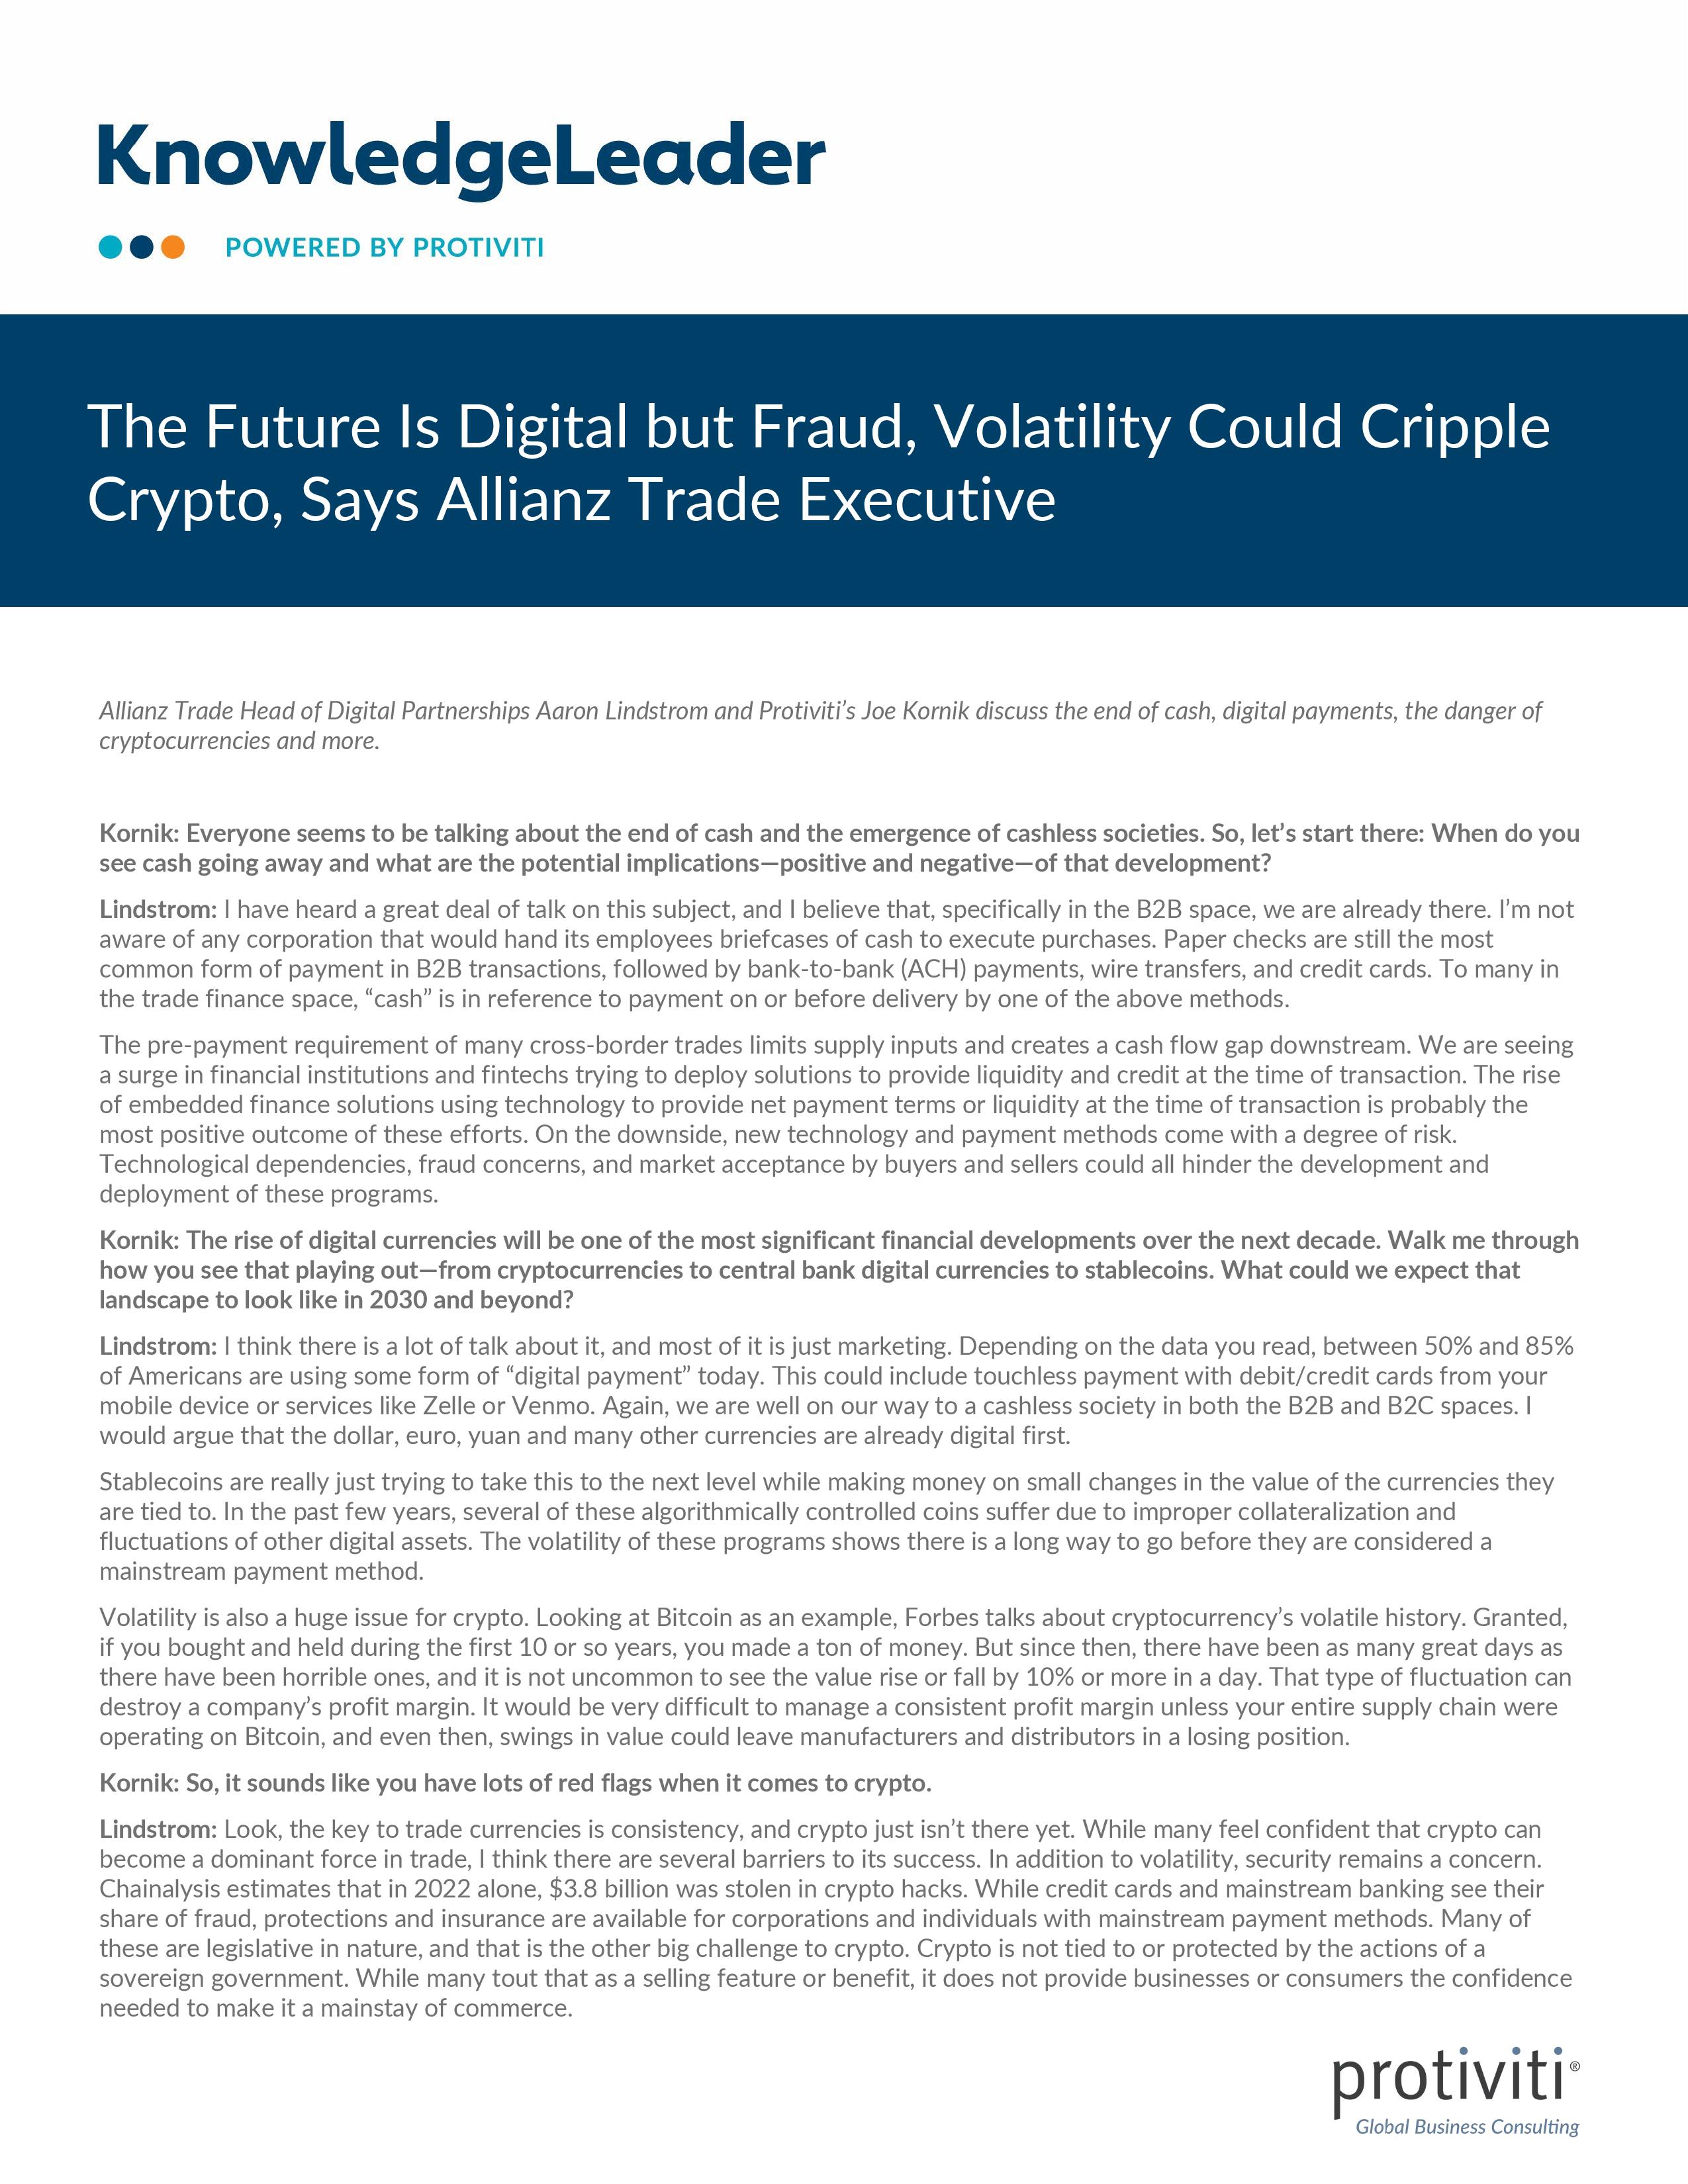 screenshot of the first page of The Future Is Digital but Fraud, Volatility Could Cripple Crypto, Says Allianz Trade Executive